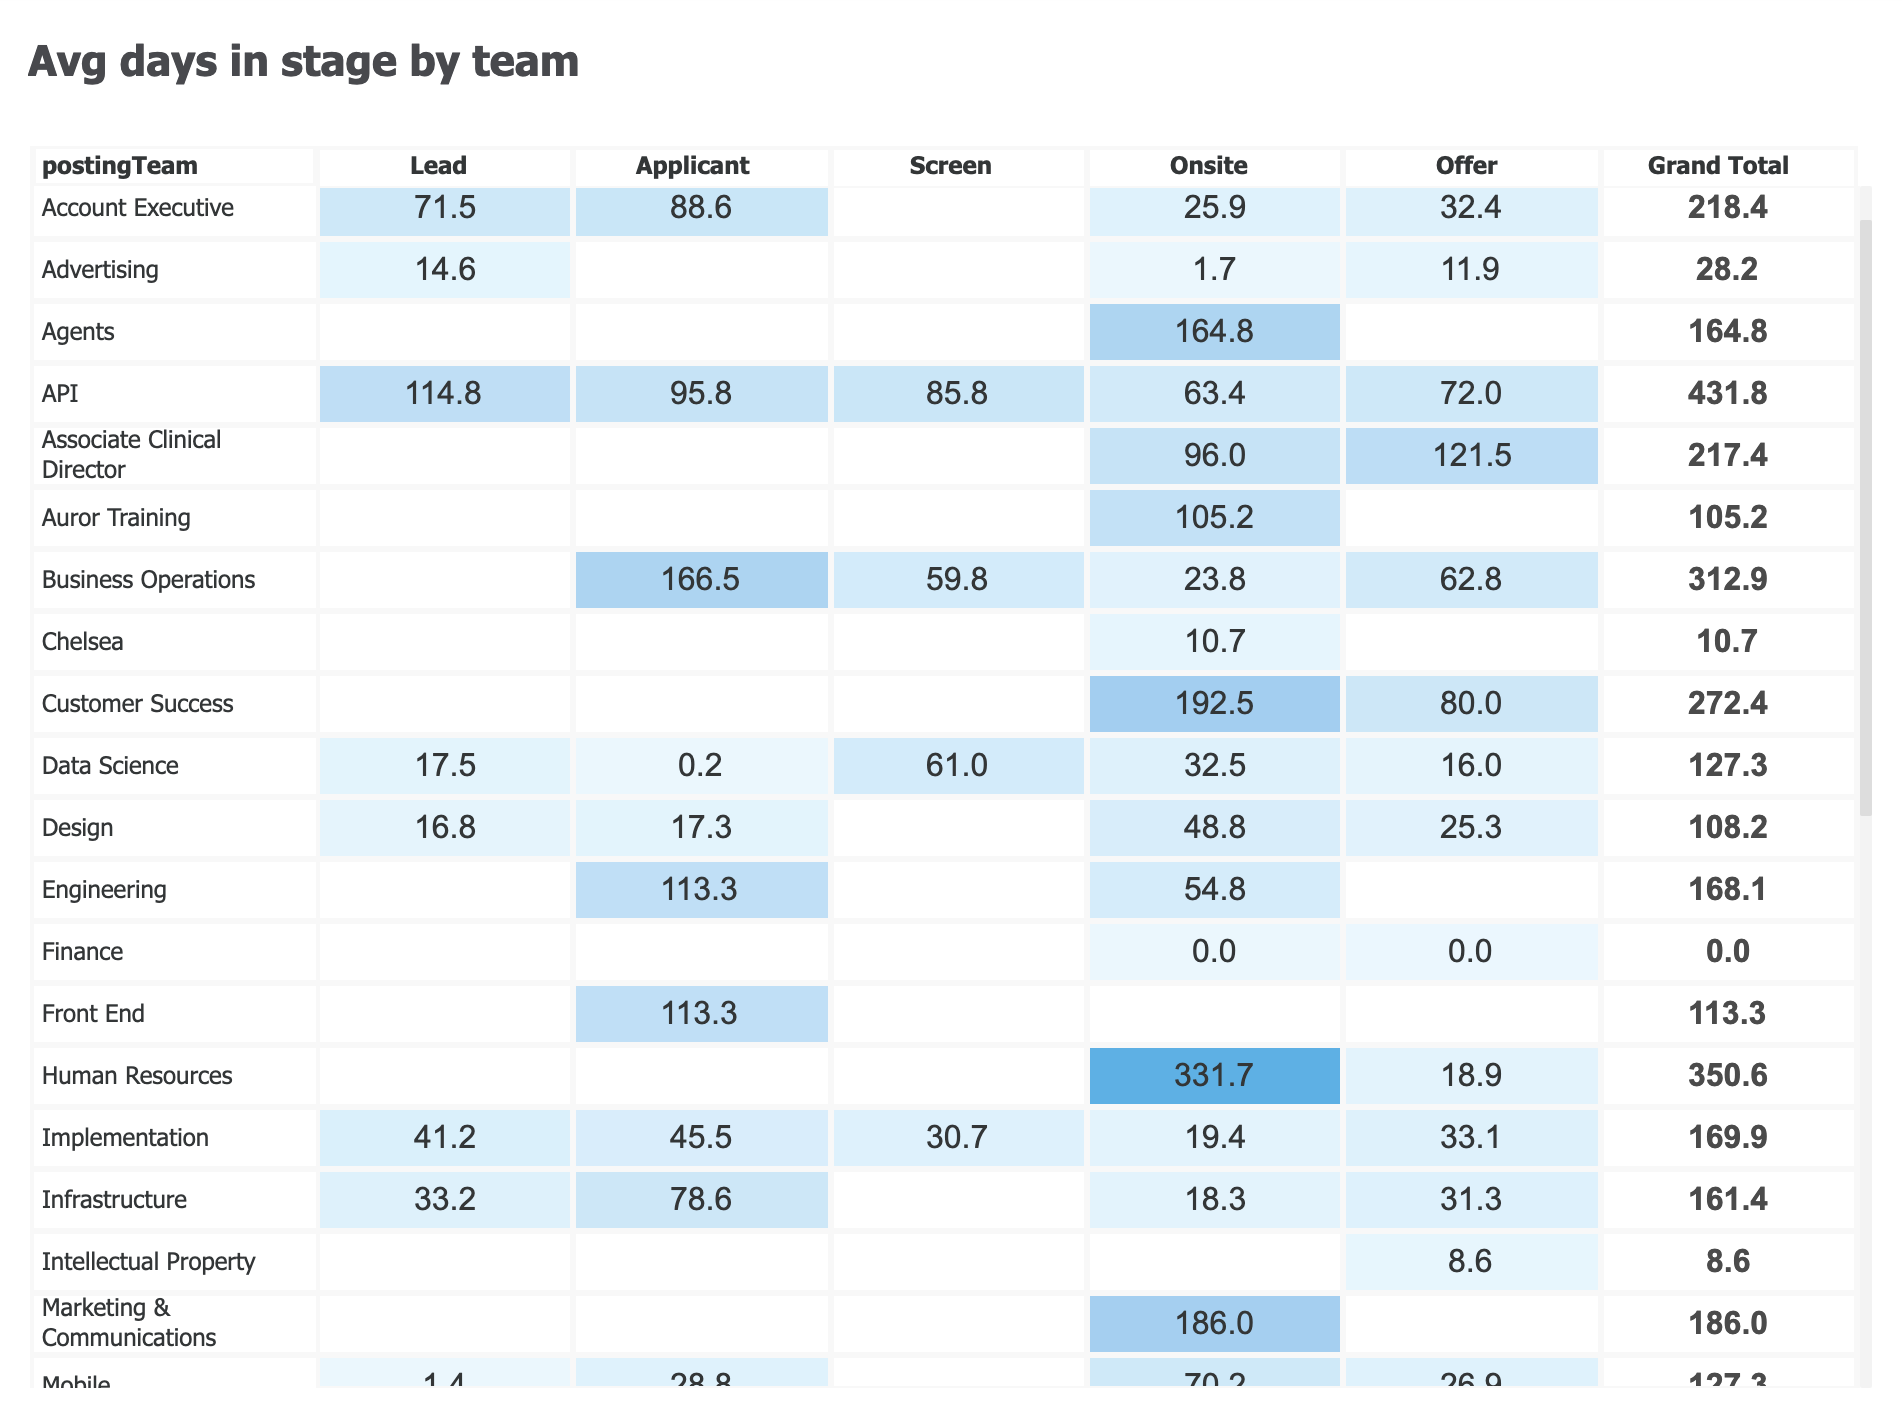 Average days in stage by team chart